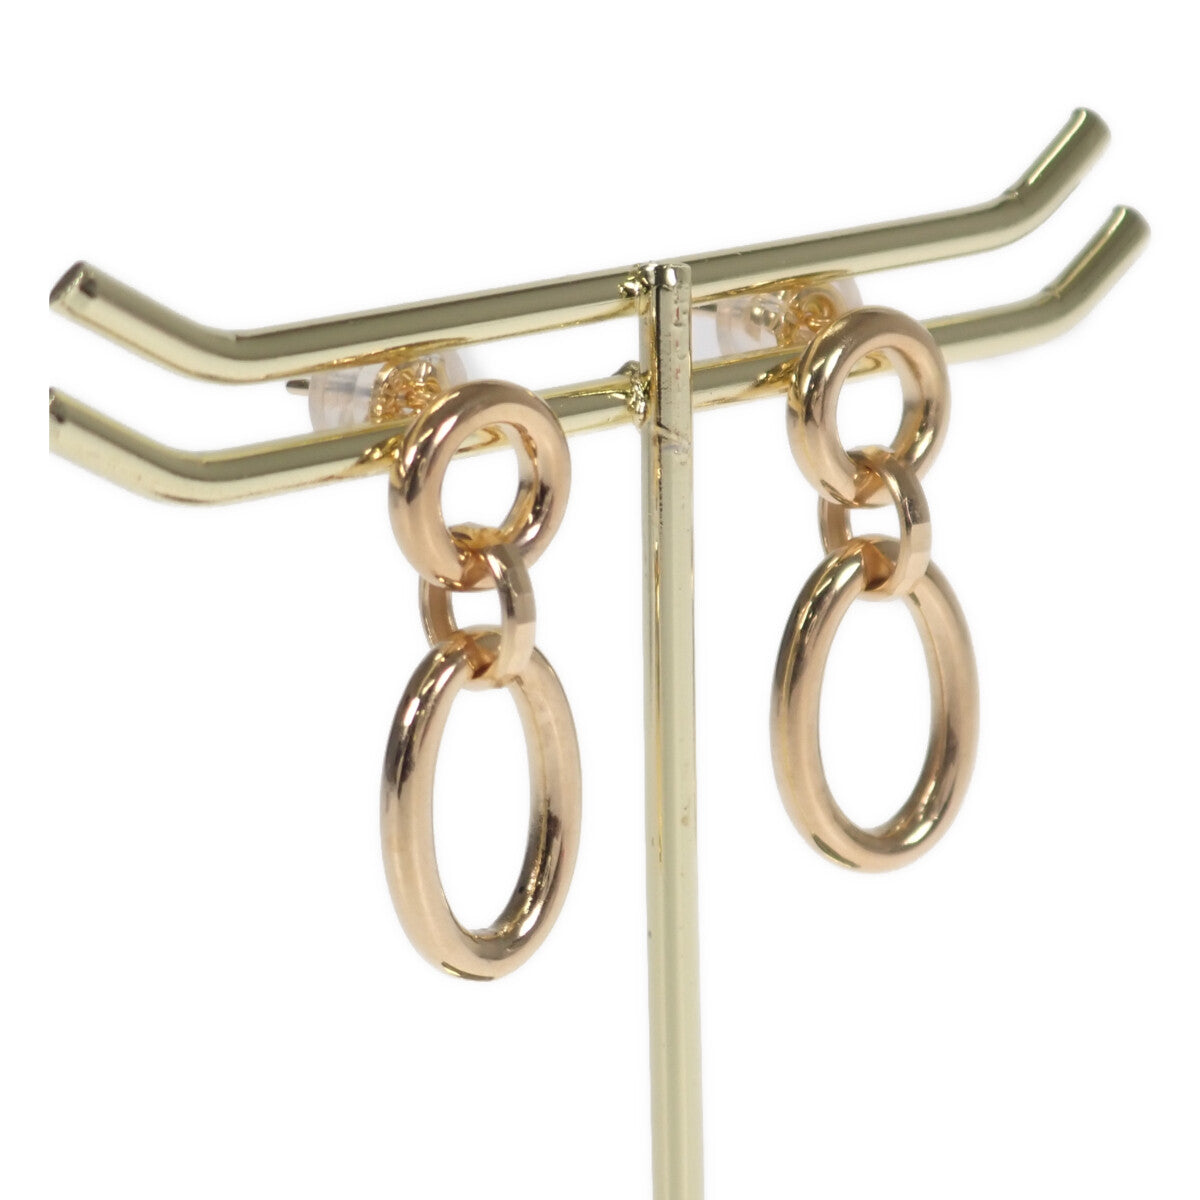 [LuxUness]  Women's Oval Design Earrings in K18 Yellow Gold, Gold, Never Used, Pre-owned in Brand new